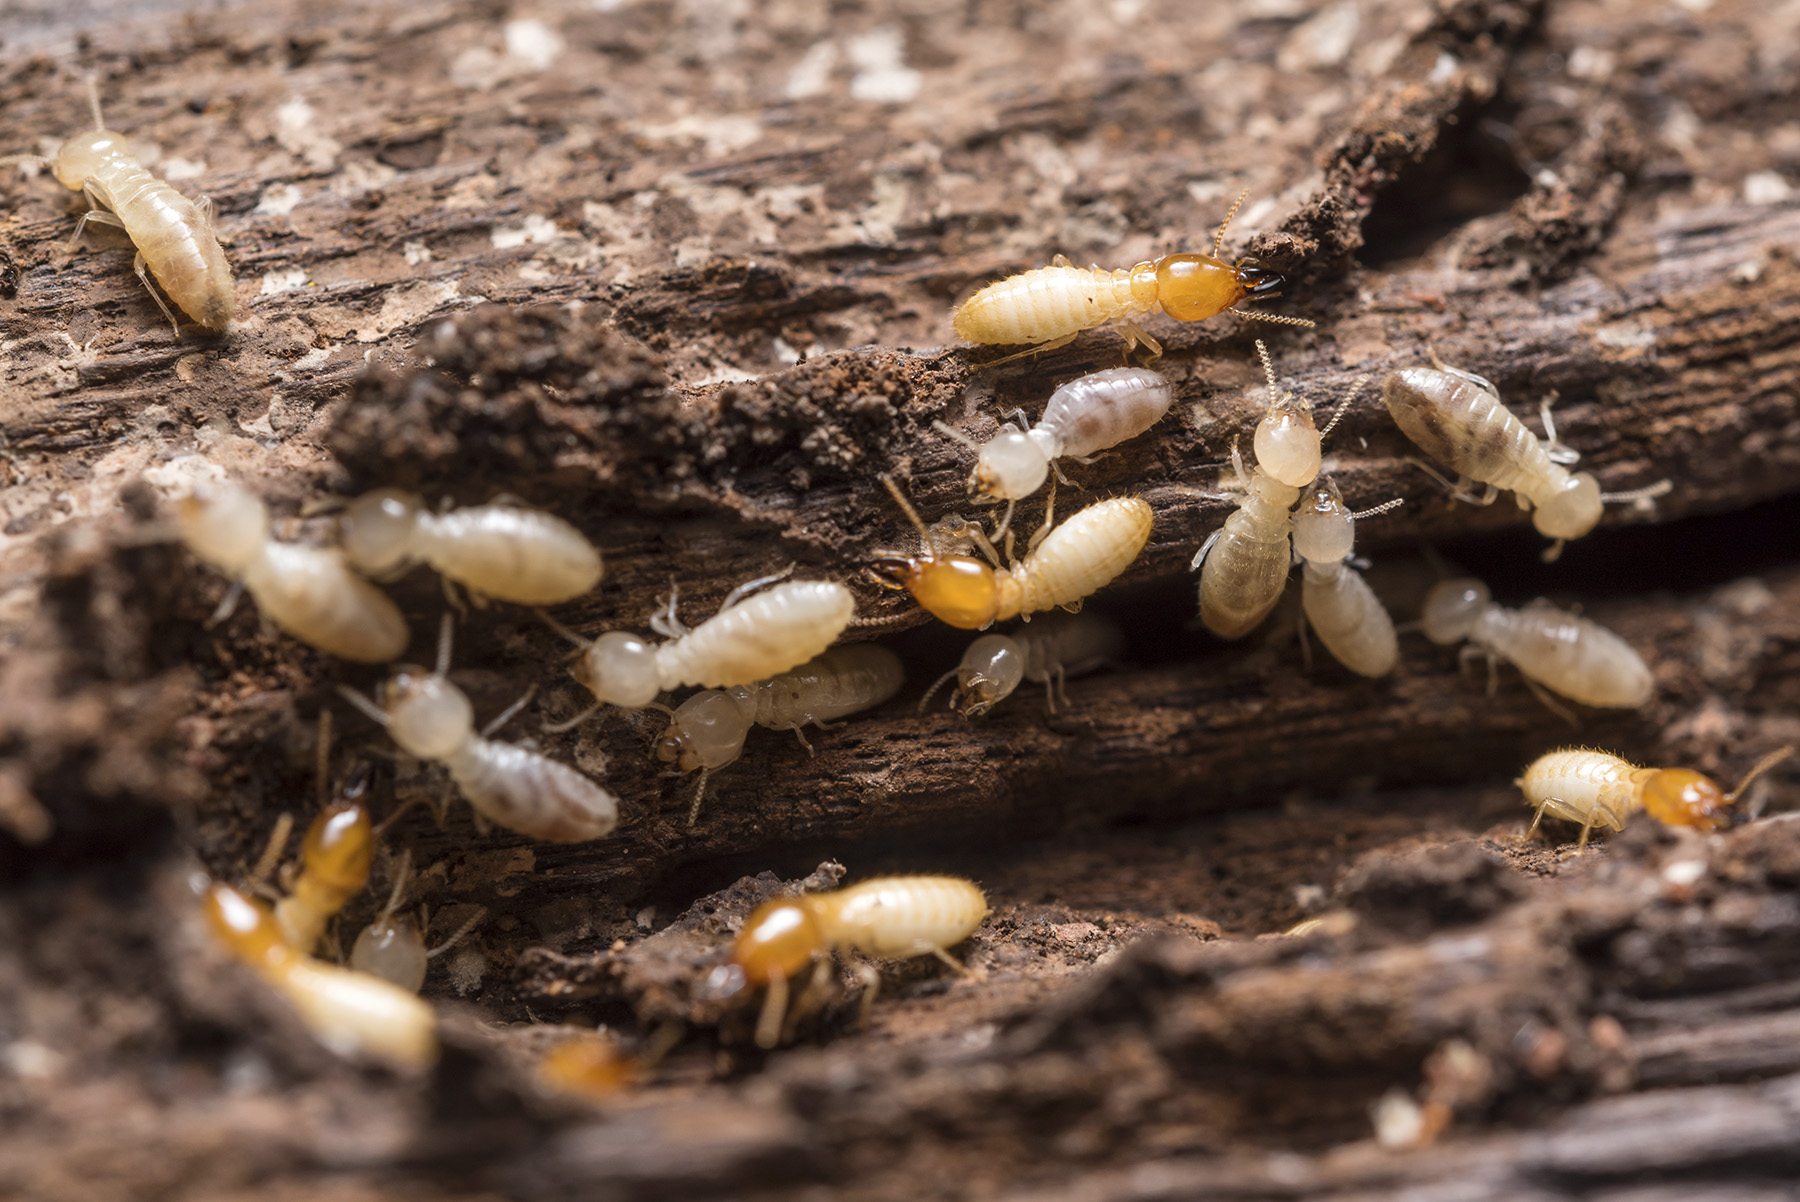 Close up of several termites feeding on rotten wood